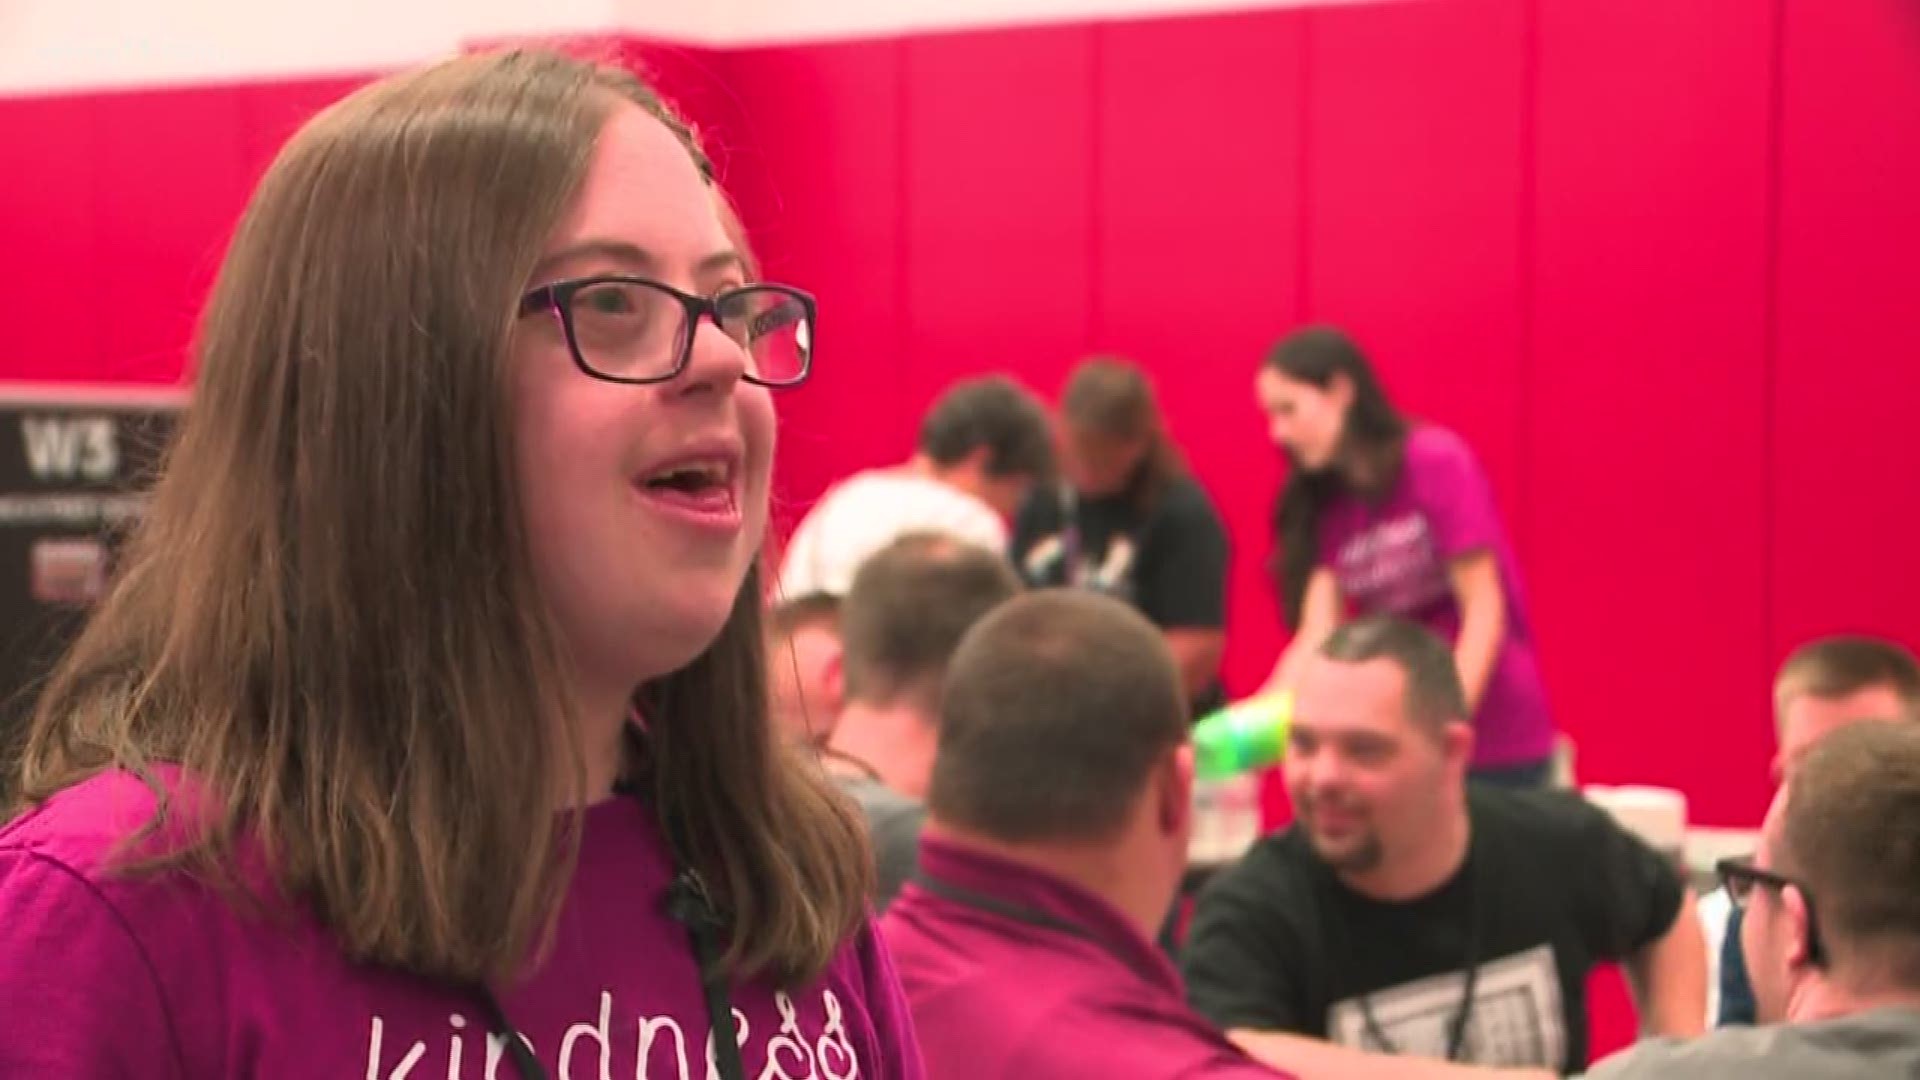 A very special surprise for several members of Down Syndrome of Louisville. After their lip-sync video to the Backstreet Boys' "I Want It That Way" went viral, they got to meet the group in person.